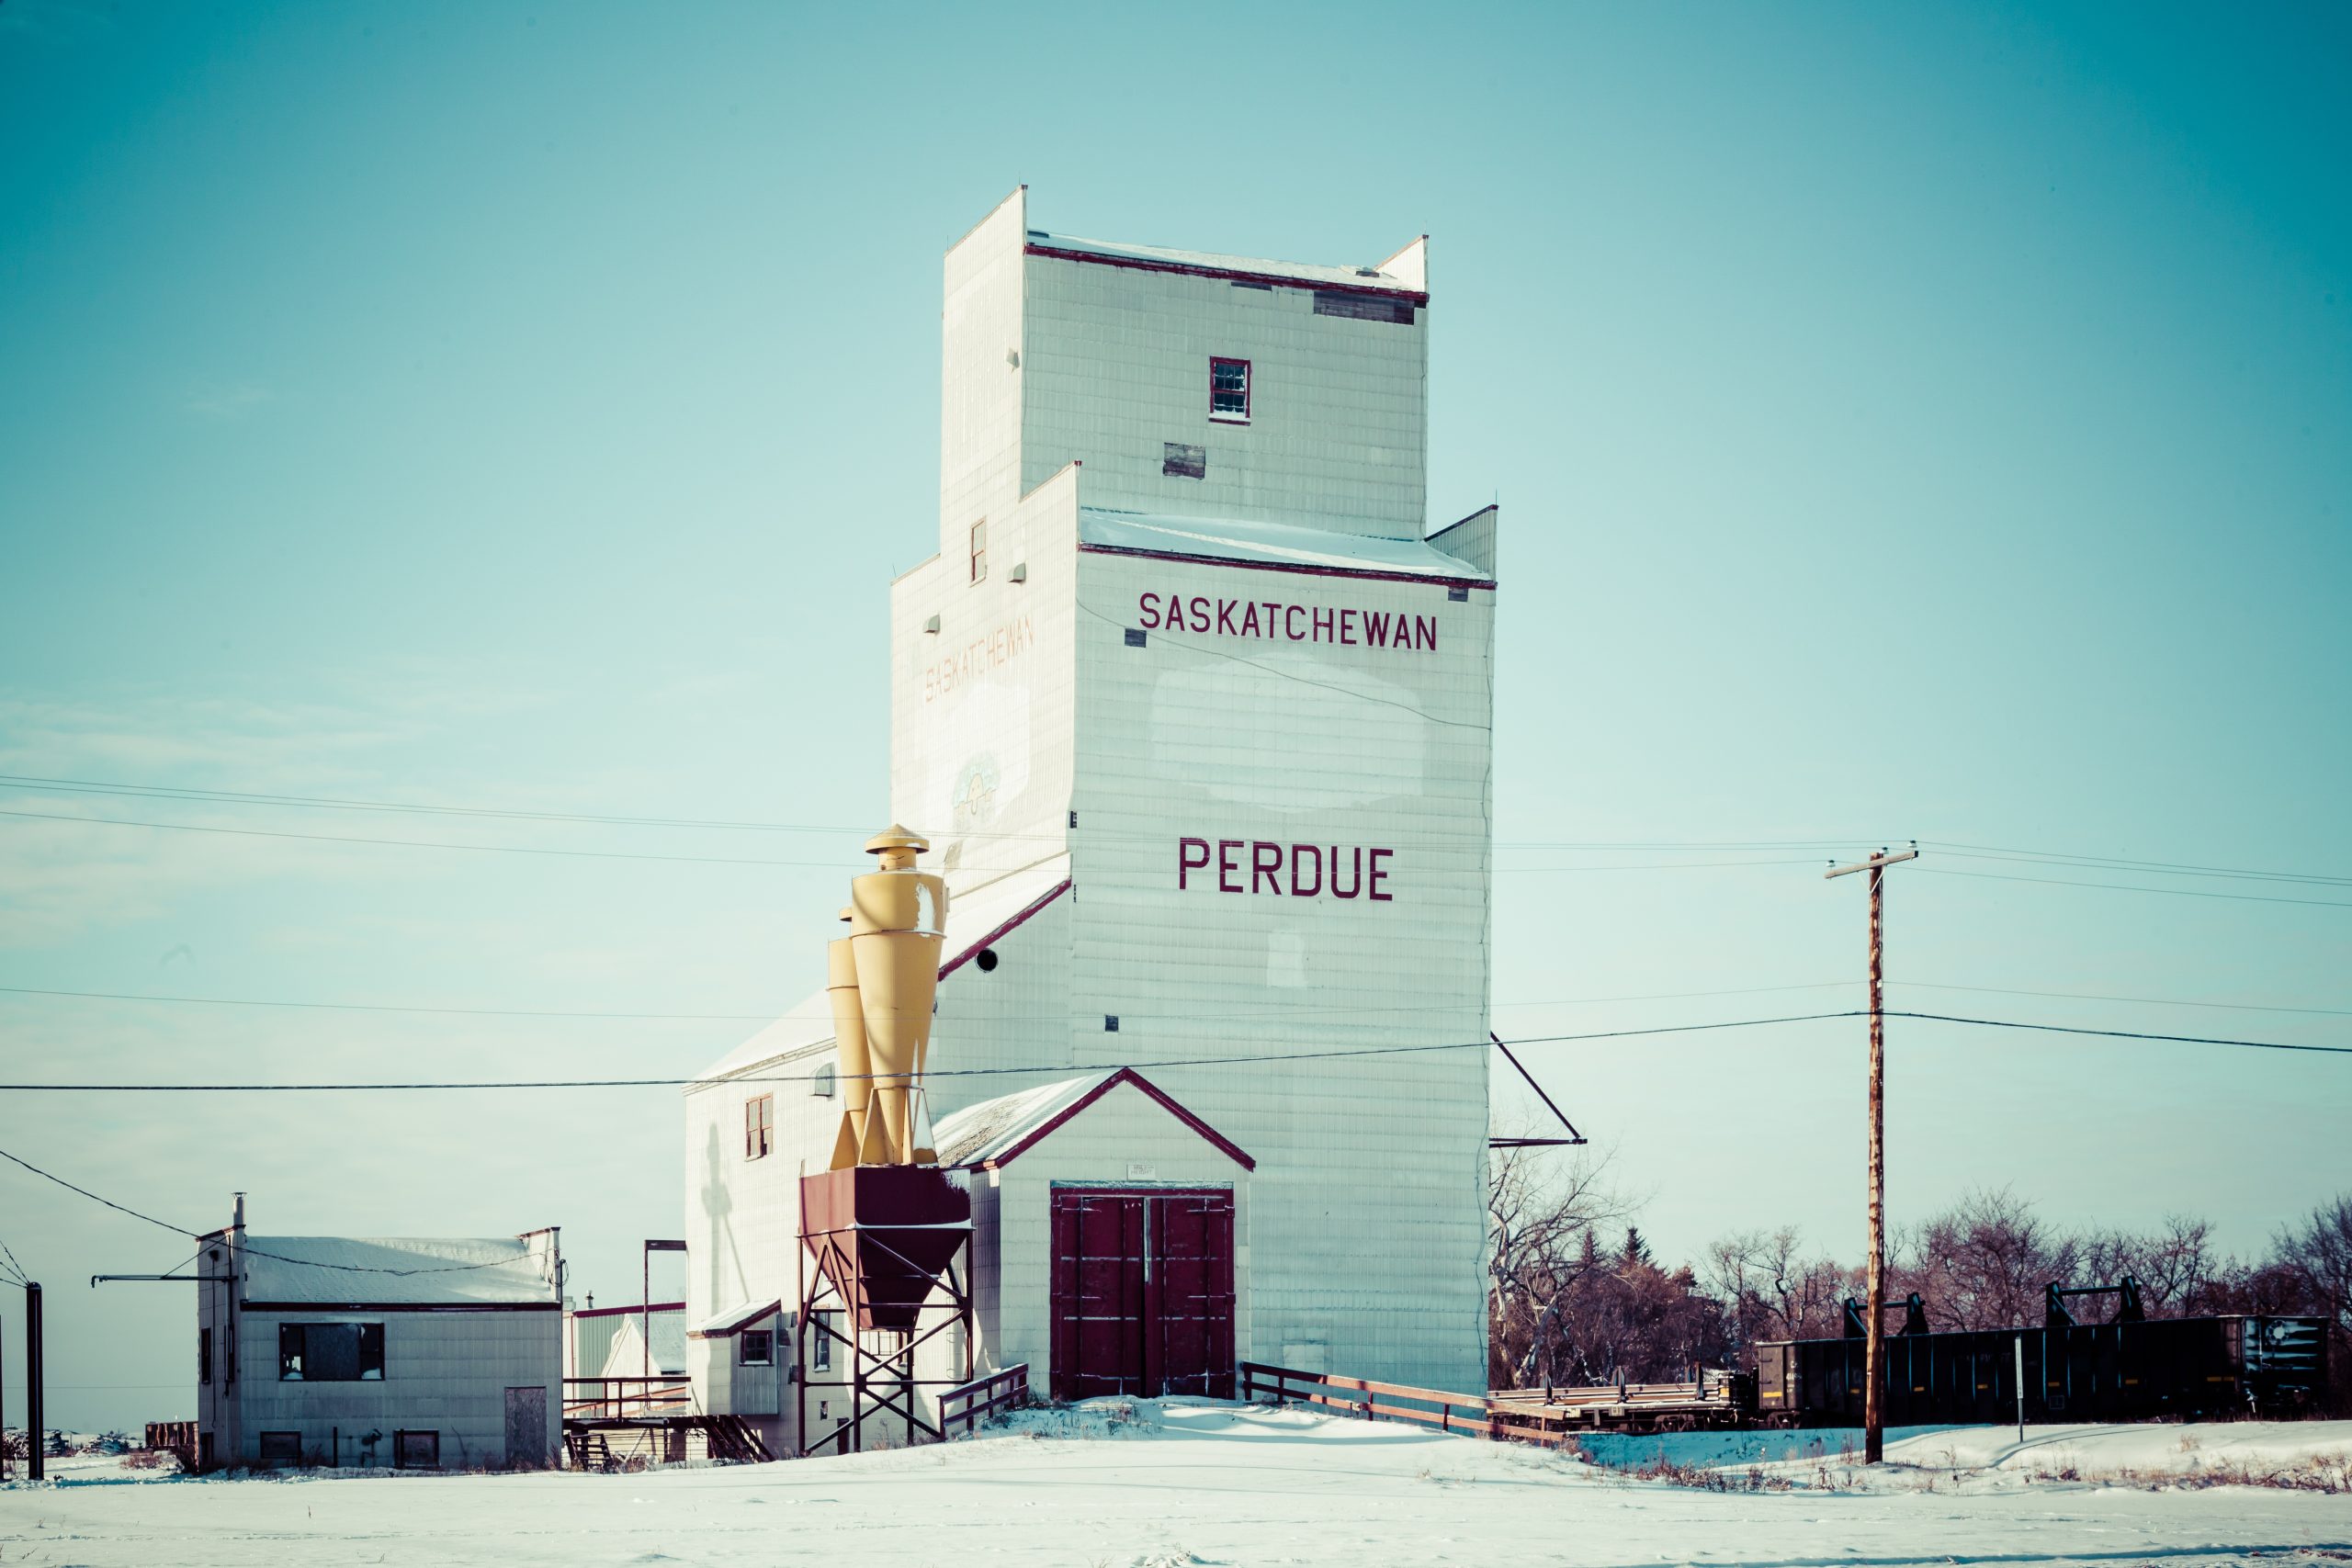 The grain elevator in Perdue, Saskatchewan, Canada on a cold but sunny winter day.